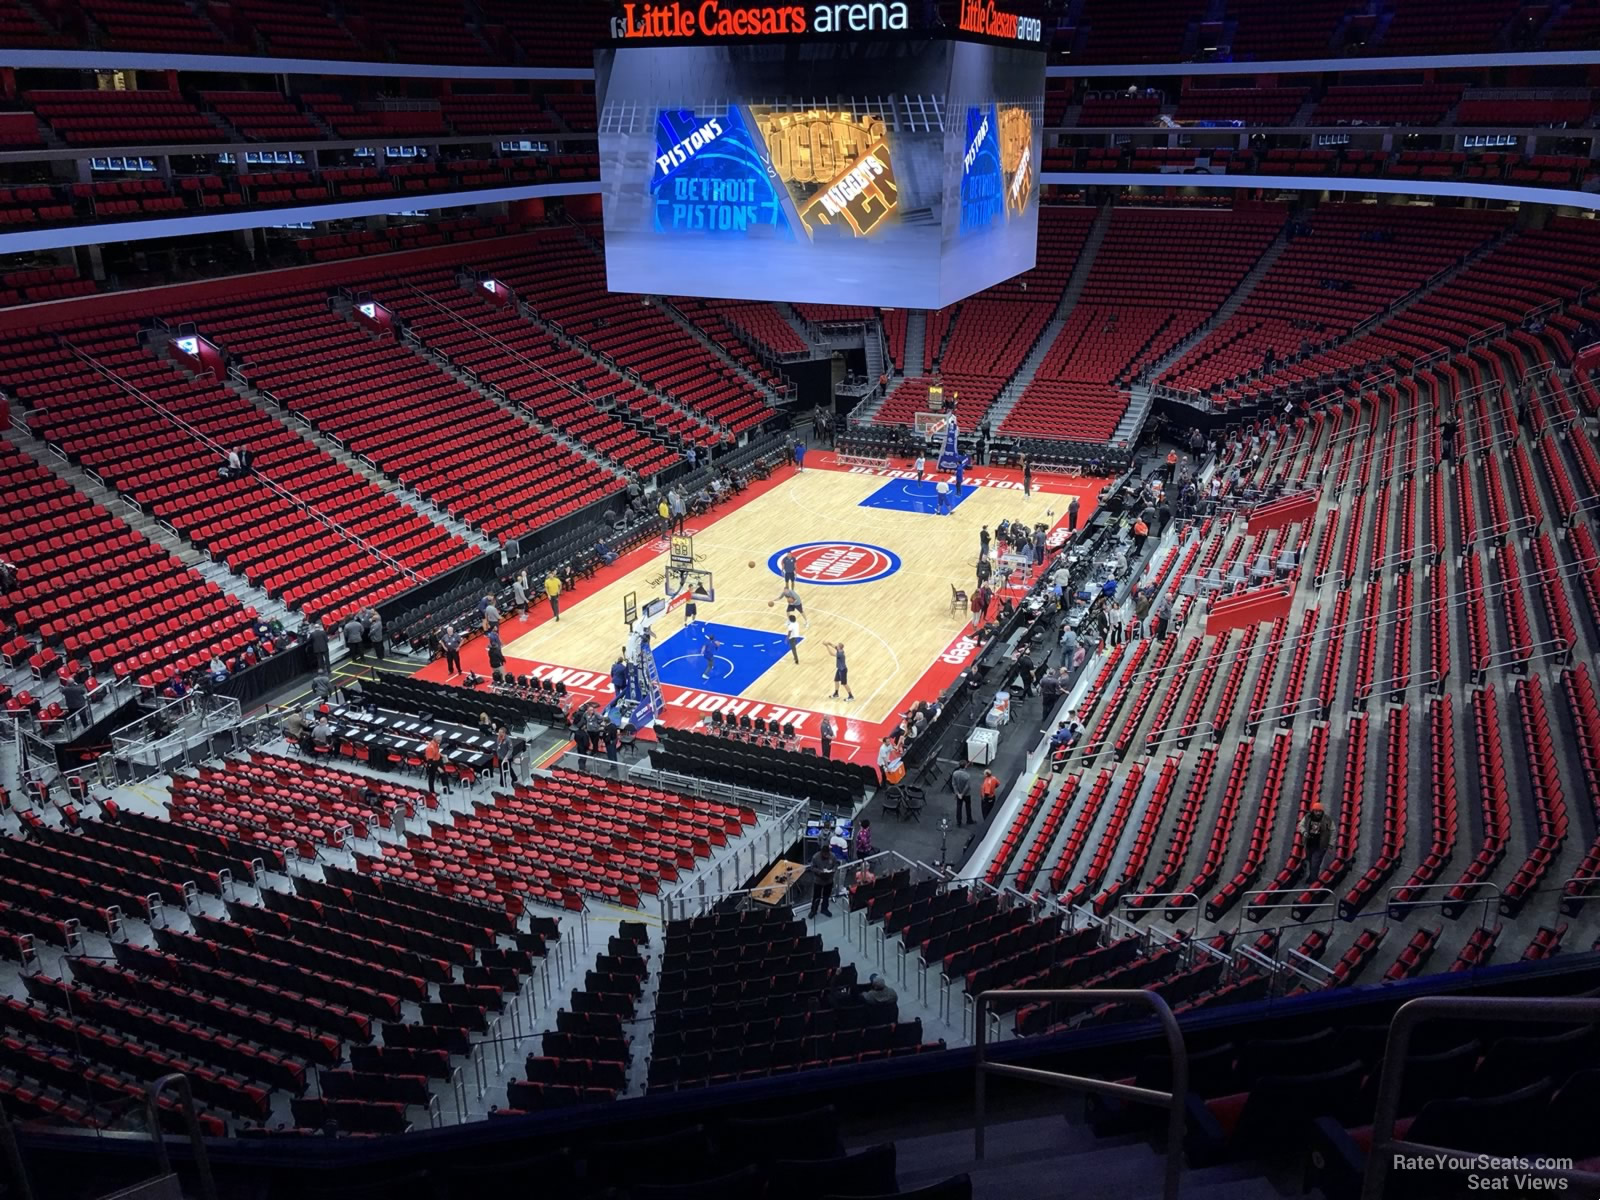 mezzanine 34, row 2 seat view  for basketball - little caesars arena